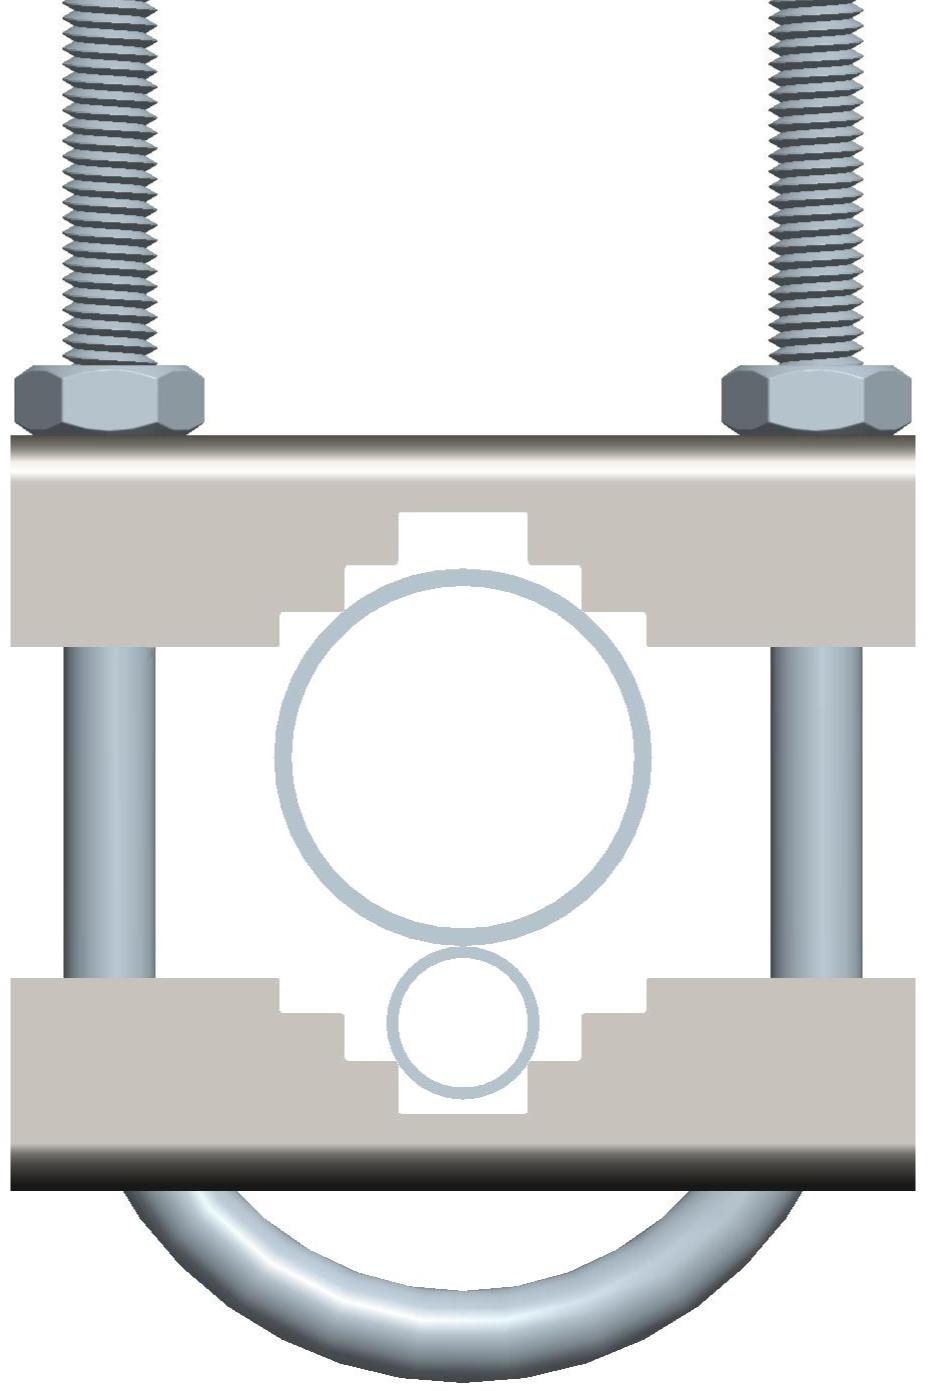 4. Mount outdoor sensor Fasten the mounting pole to your mounting pole or bracket (purchased separately) with the U-bolt, mounting pole brackets and nuts, as shown in Figure 6.